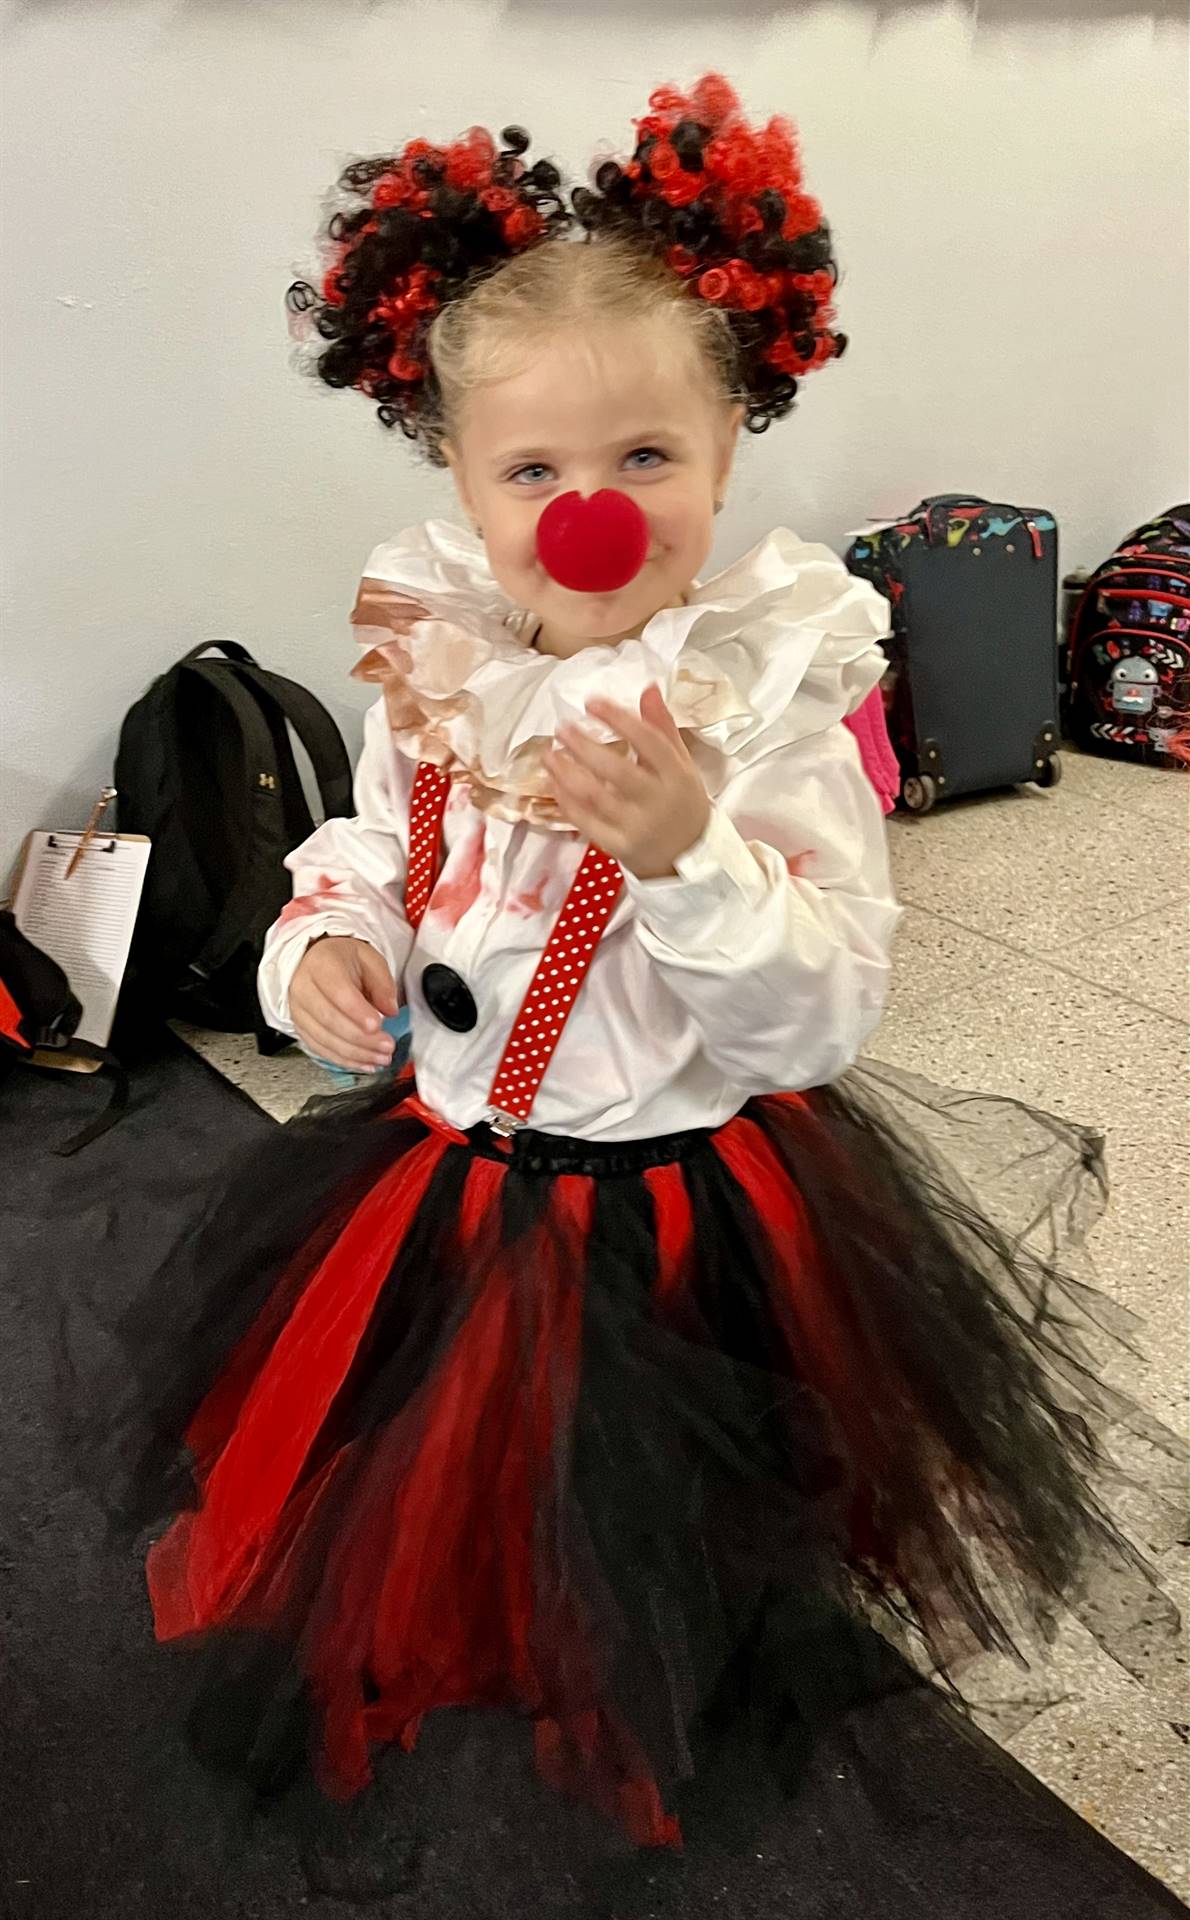 a student dressed as a clown with a big red nose!